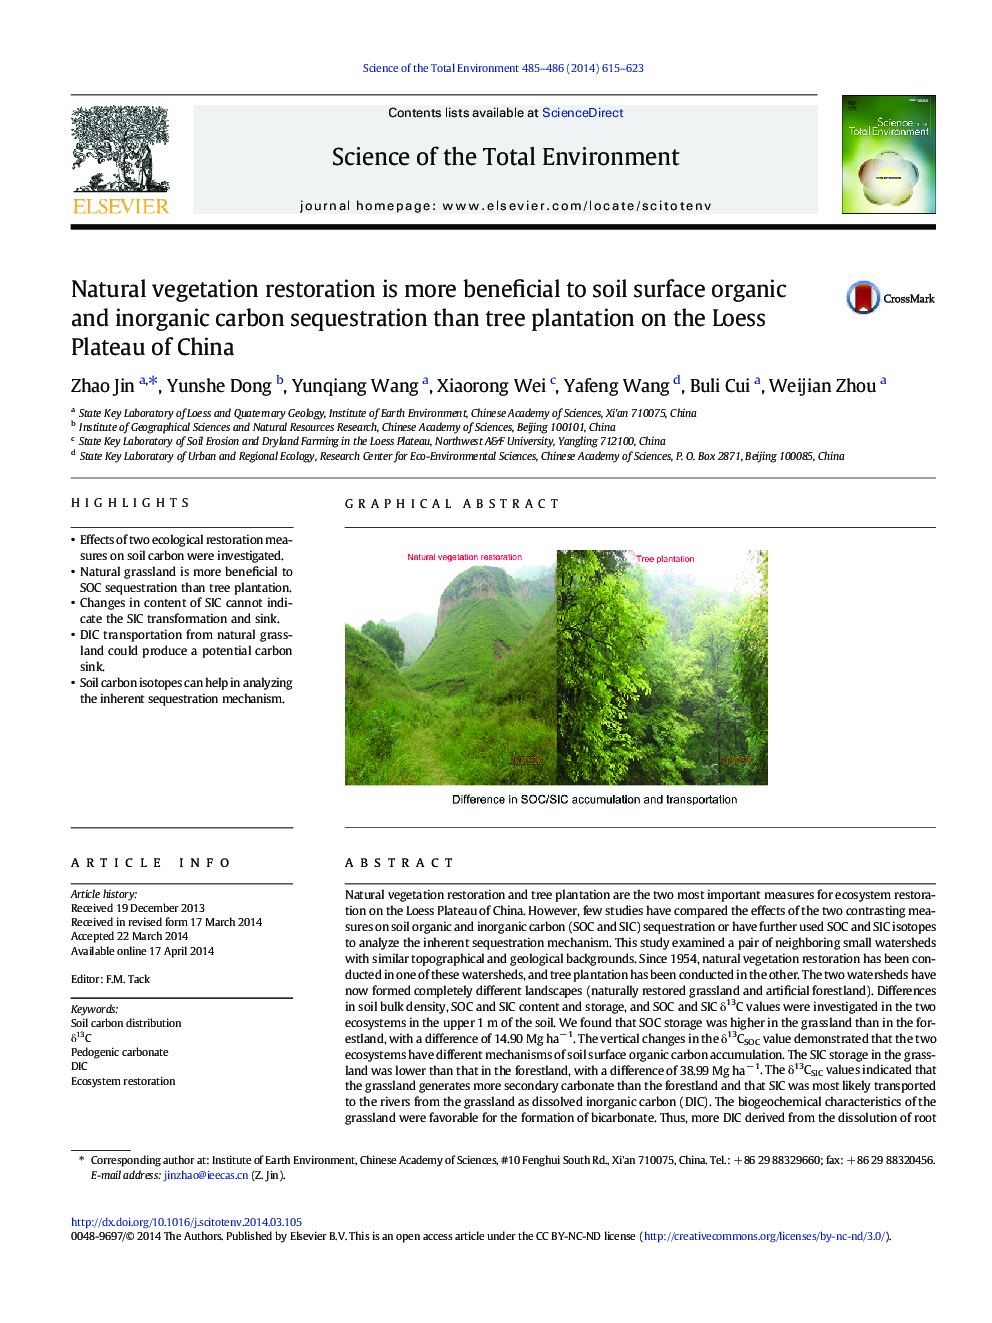 Natural vegetation restoration is more beneficial to soil surface organic and inorganic carbon sequestration than tree plantation on the Loess Plateau of China